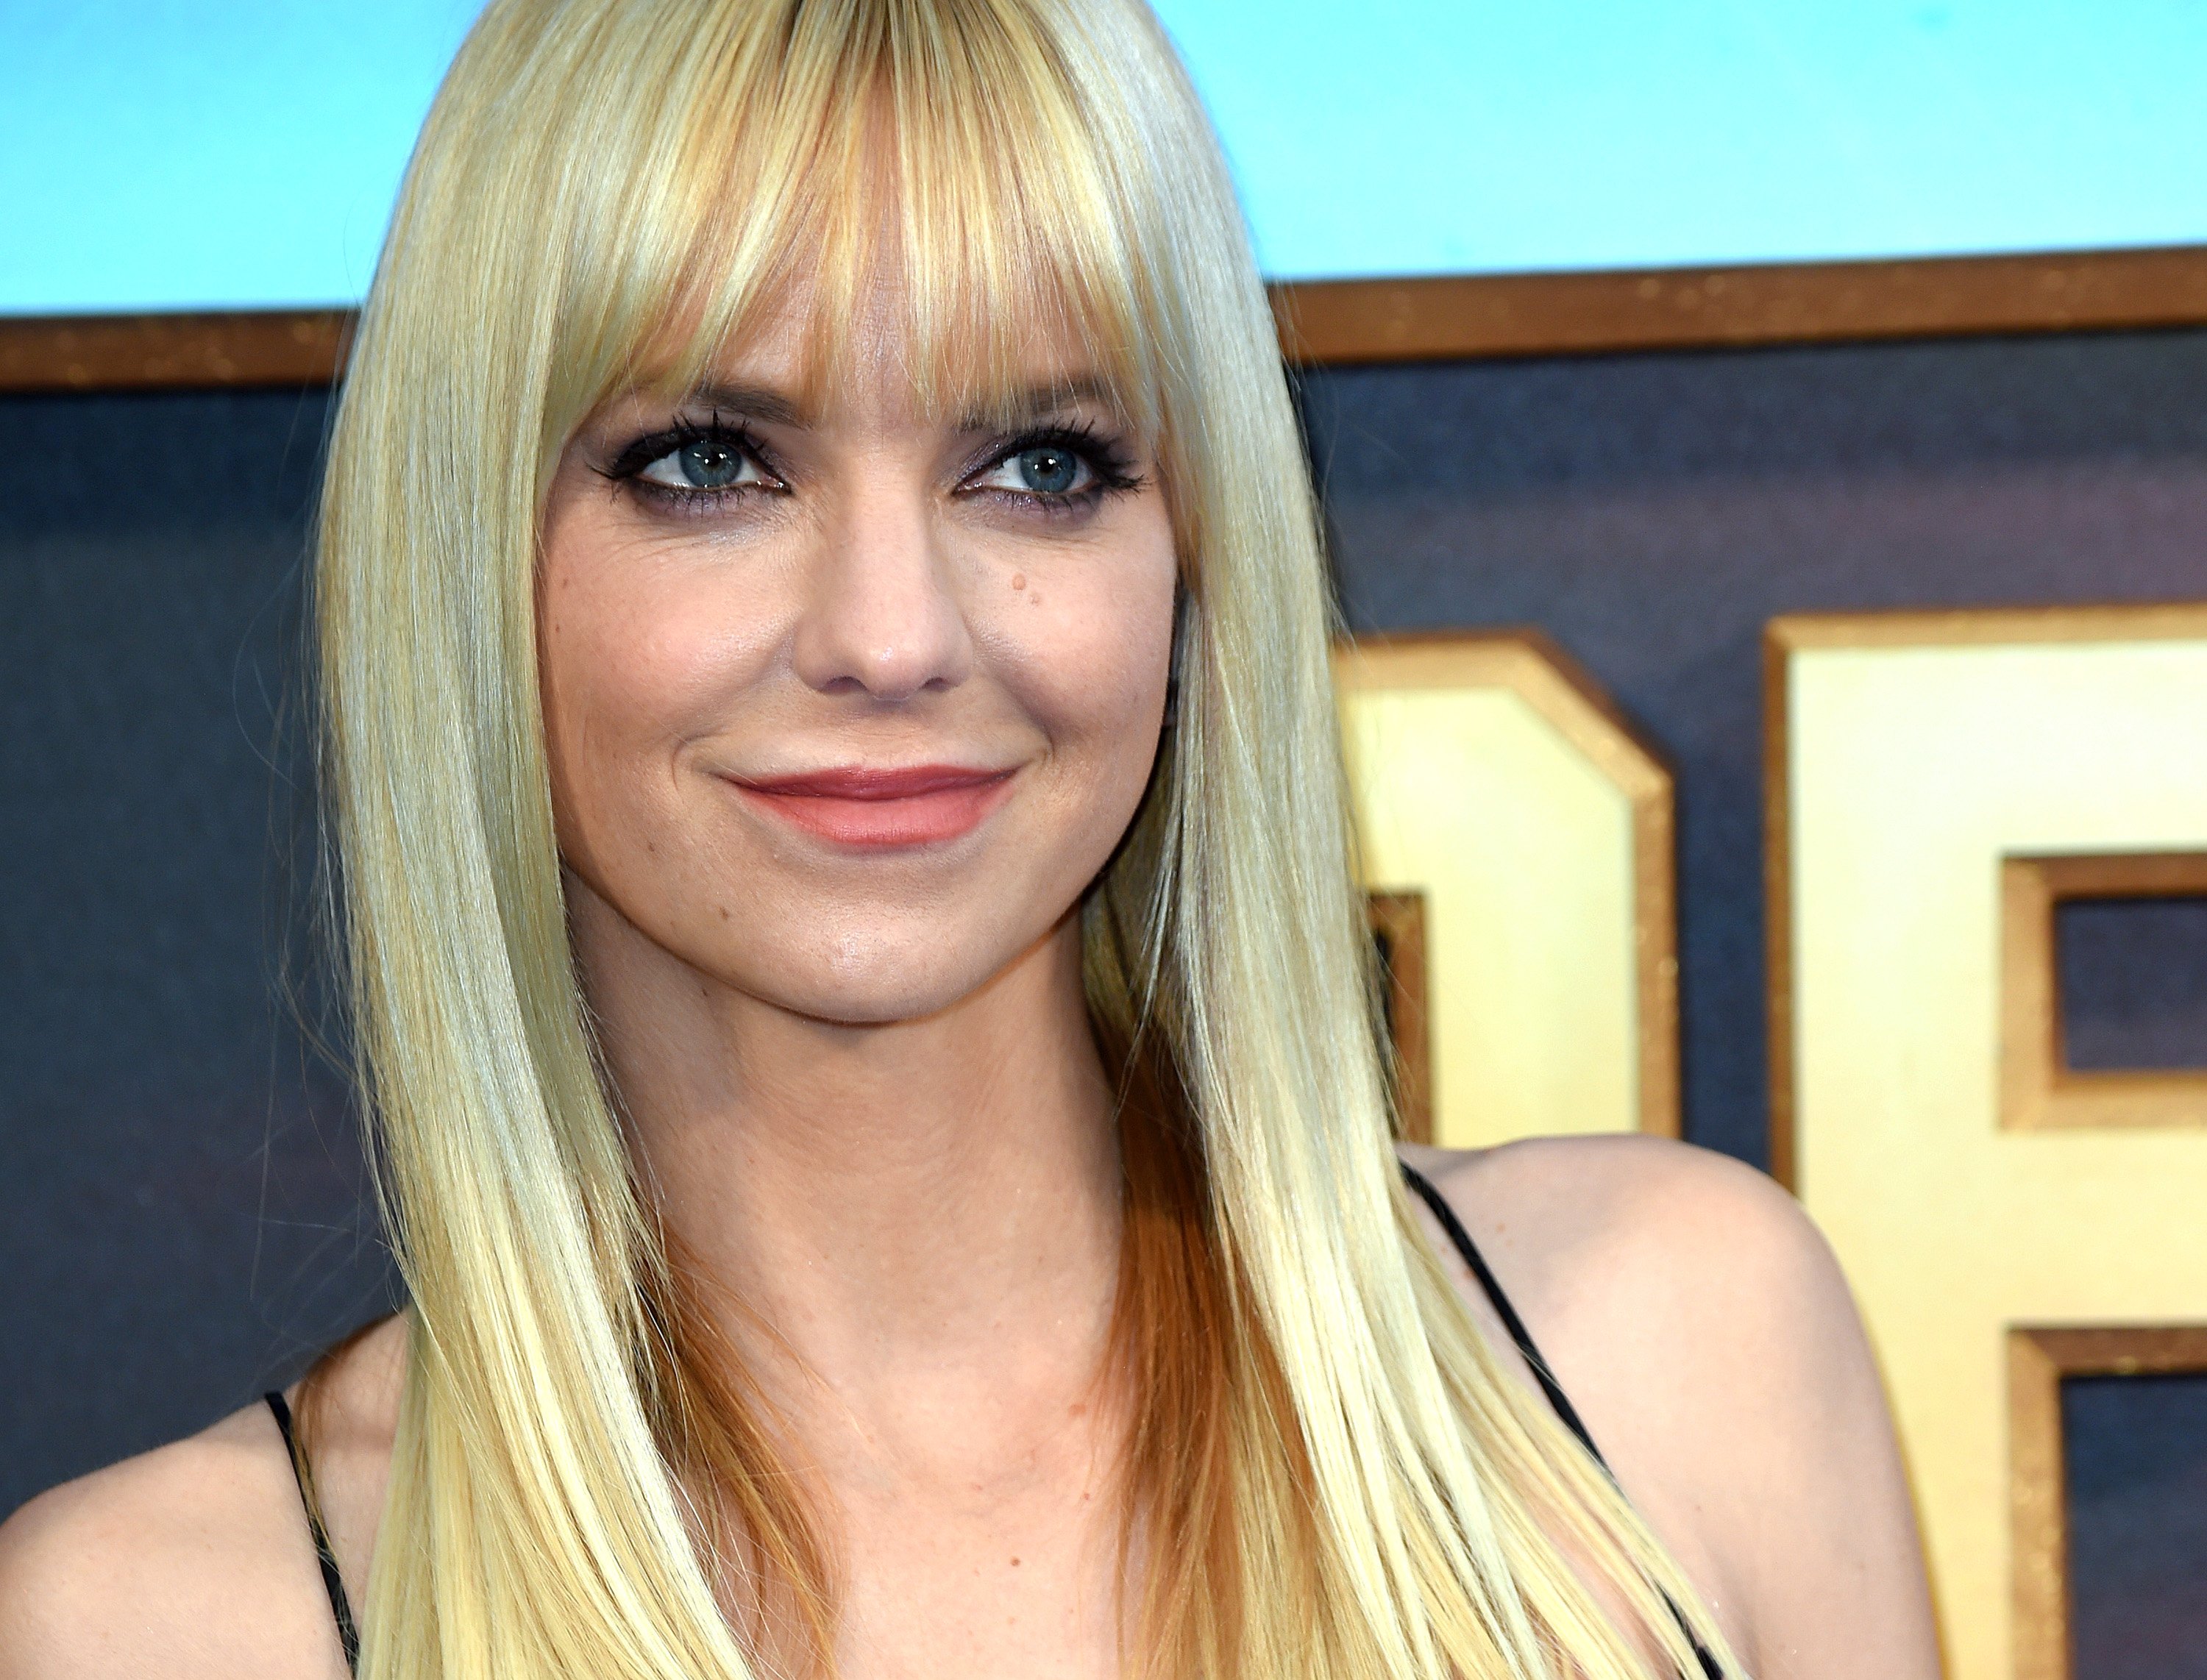 Anna Faris Never Thought She Would ‘End Up in Comedy’